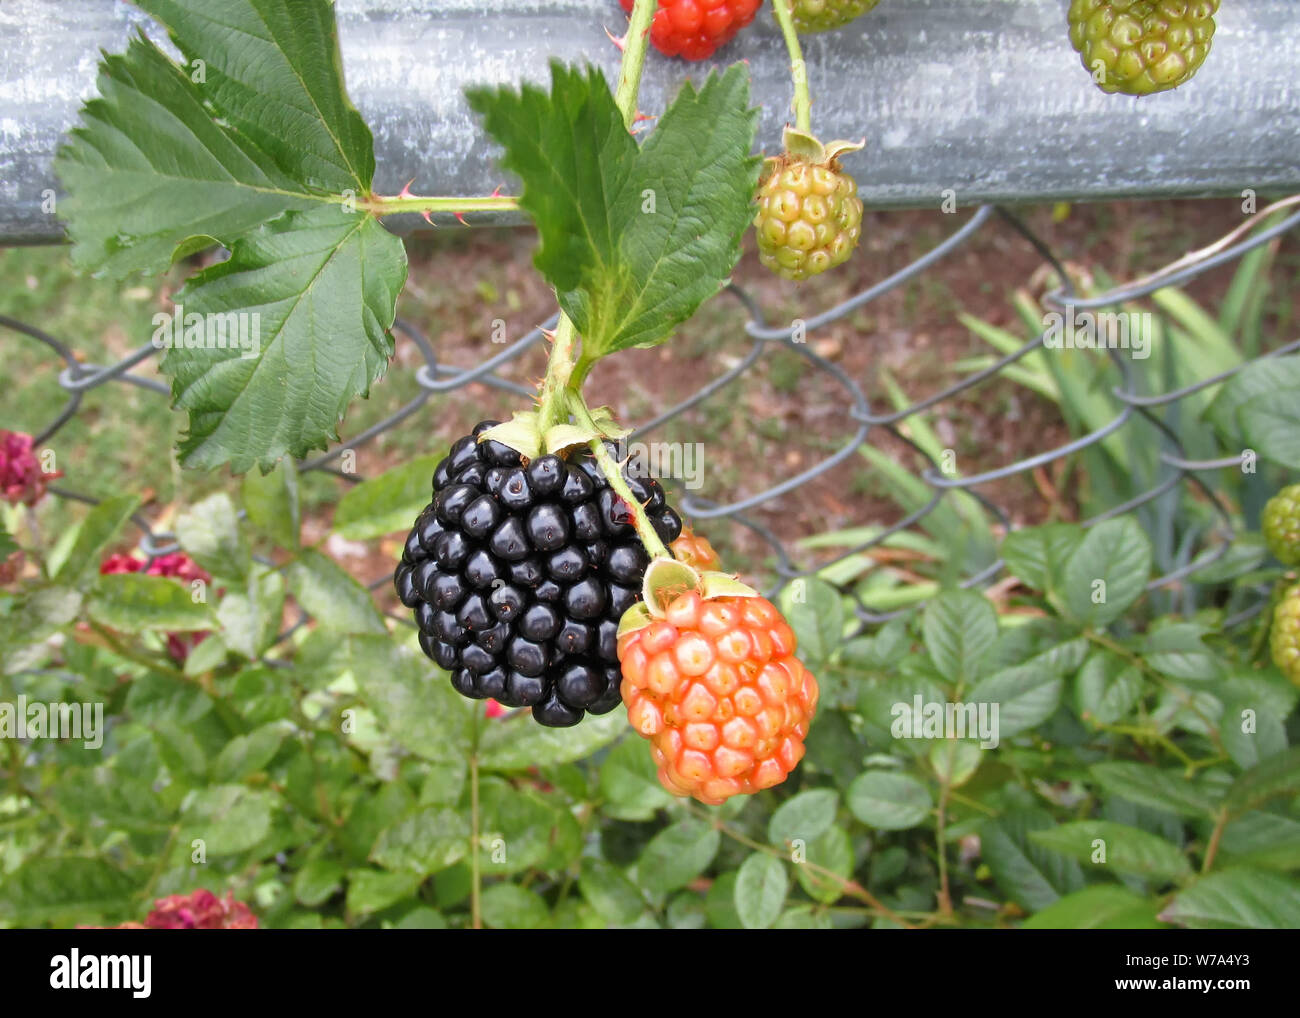 One ripe blackberry and one ripening blackberry hang on a chain link fence. Stock Photo